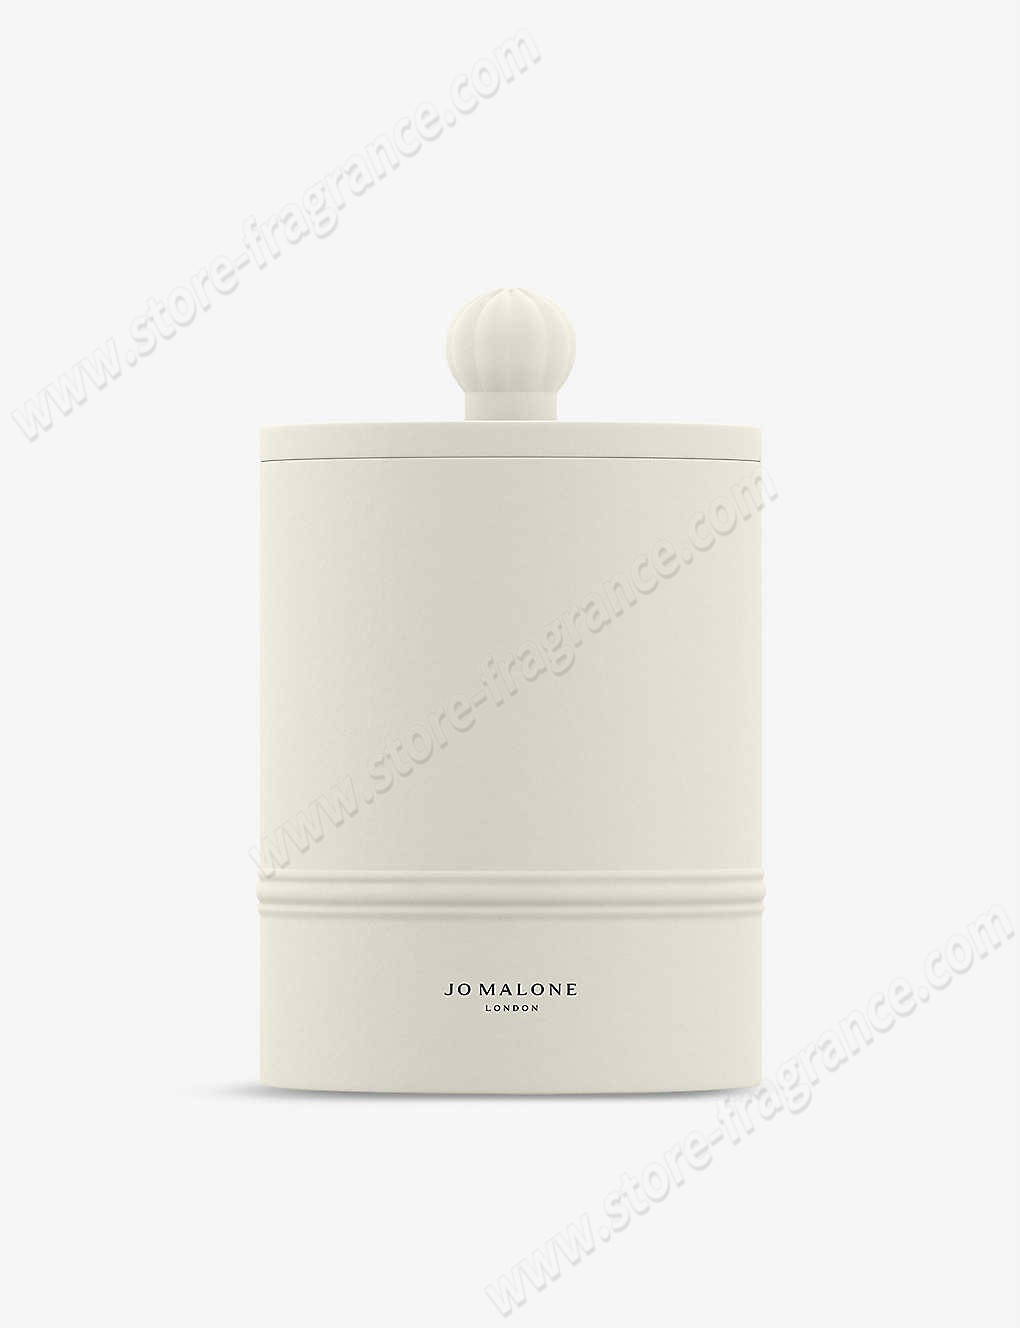 JO MALONE LONDON/Glowing Embers scented candle 300g ✿ Discount Store - JO MALONE LONDON/Glowing Embers scented candle 300g ✿ Discount Store